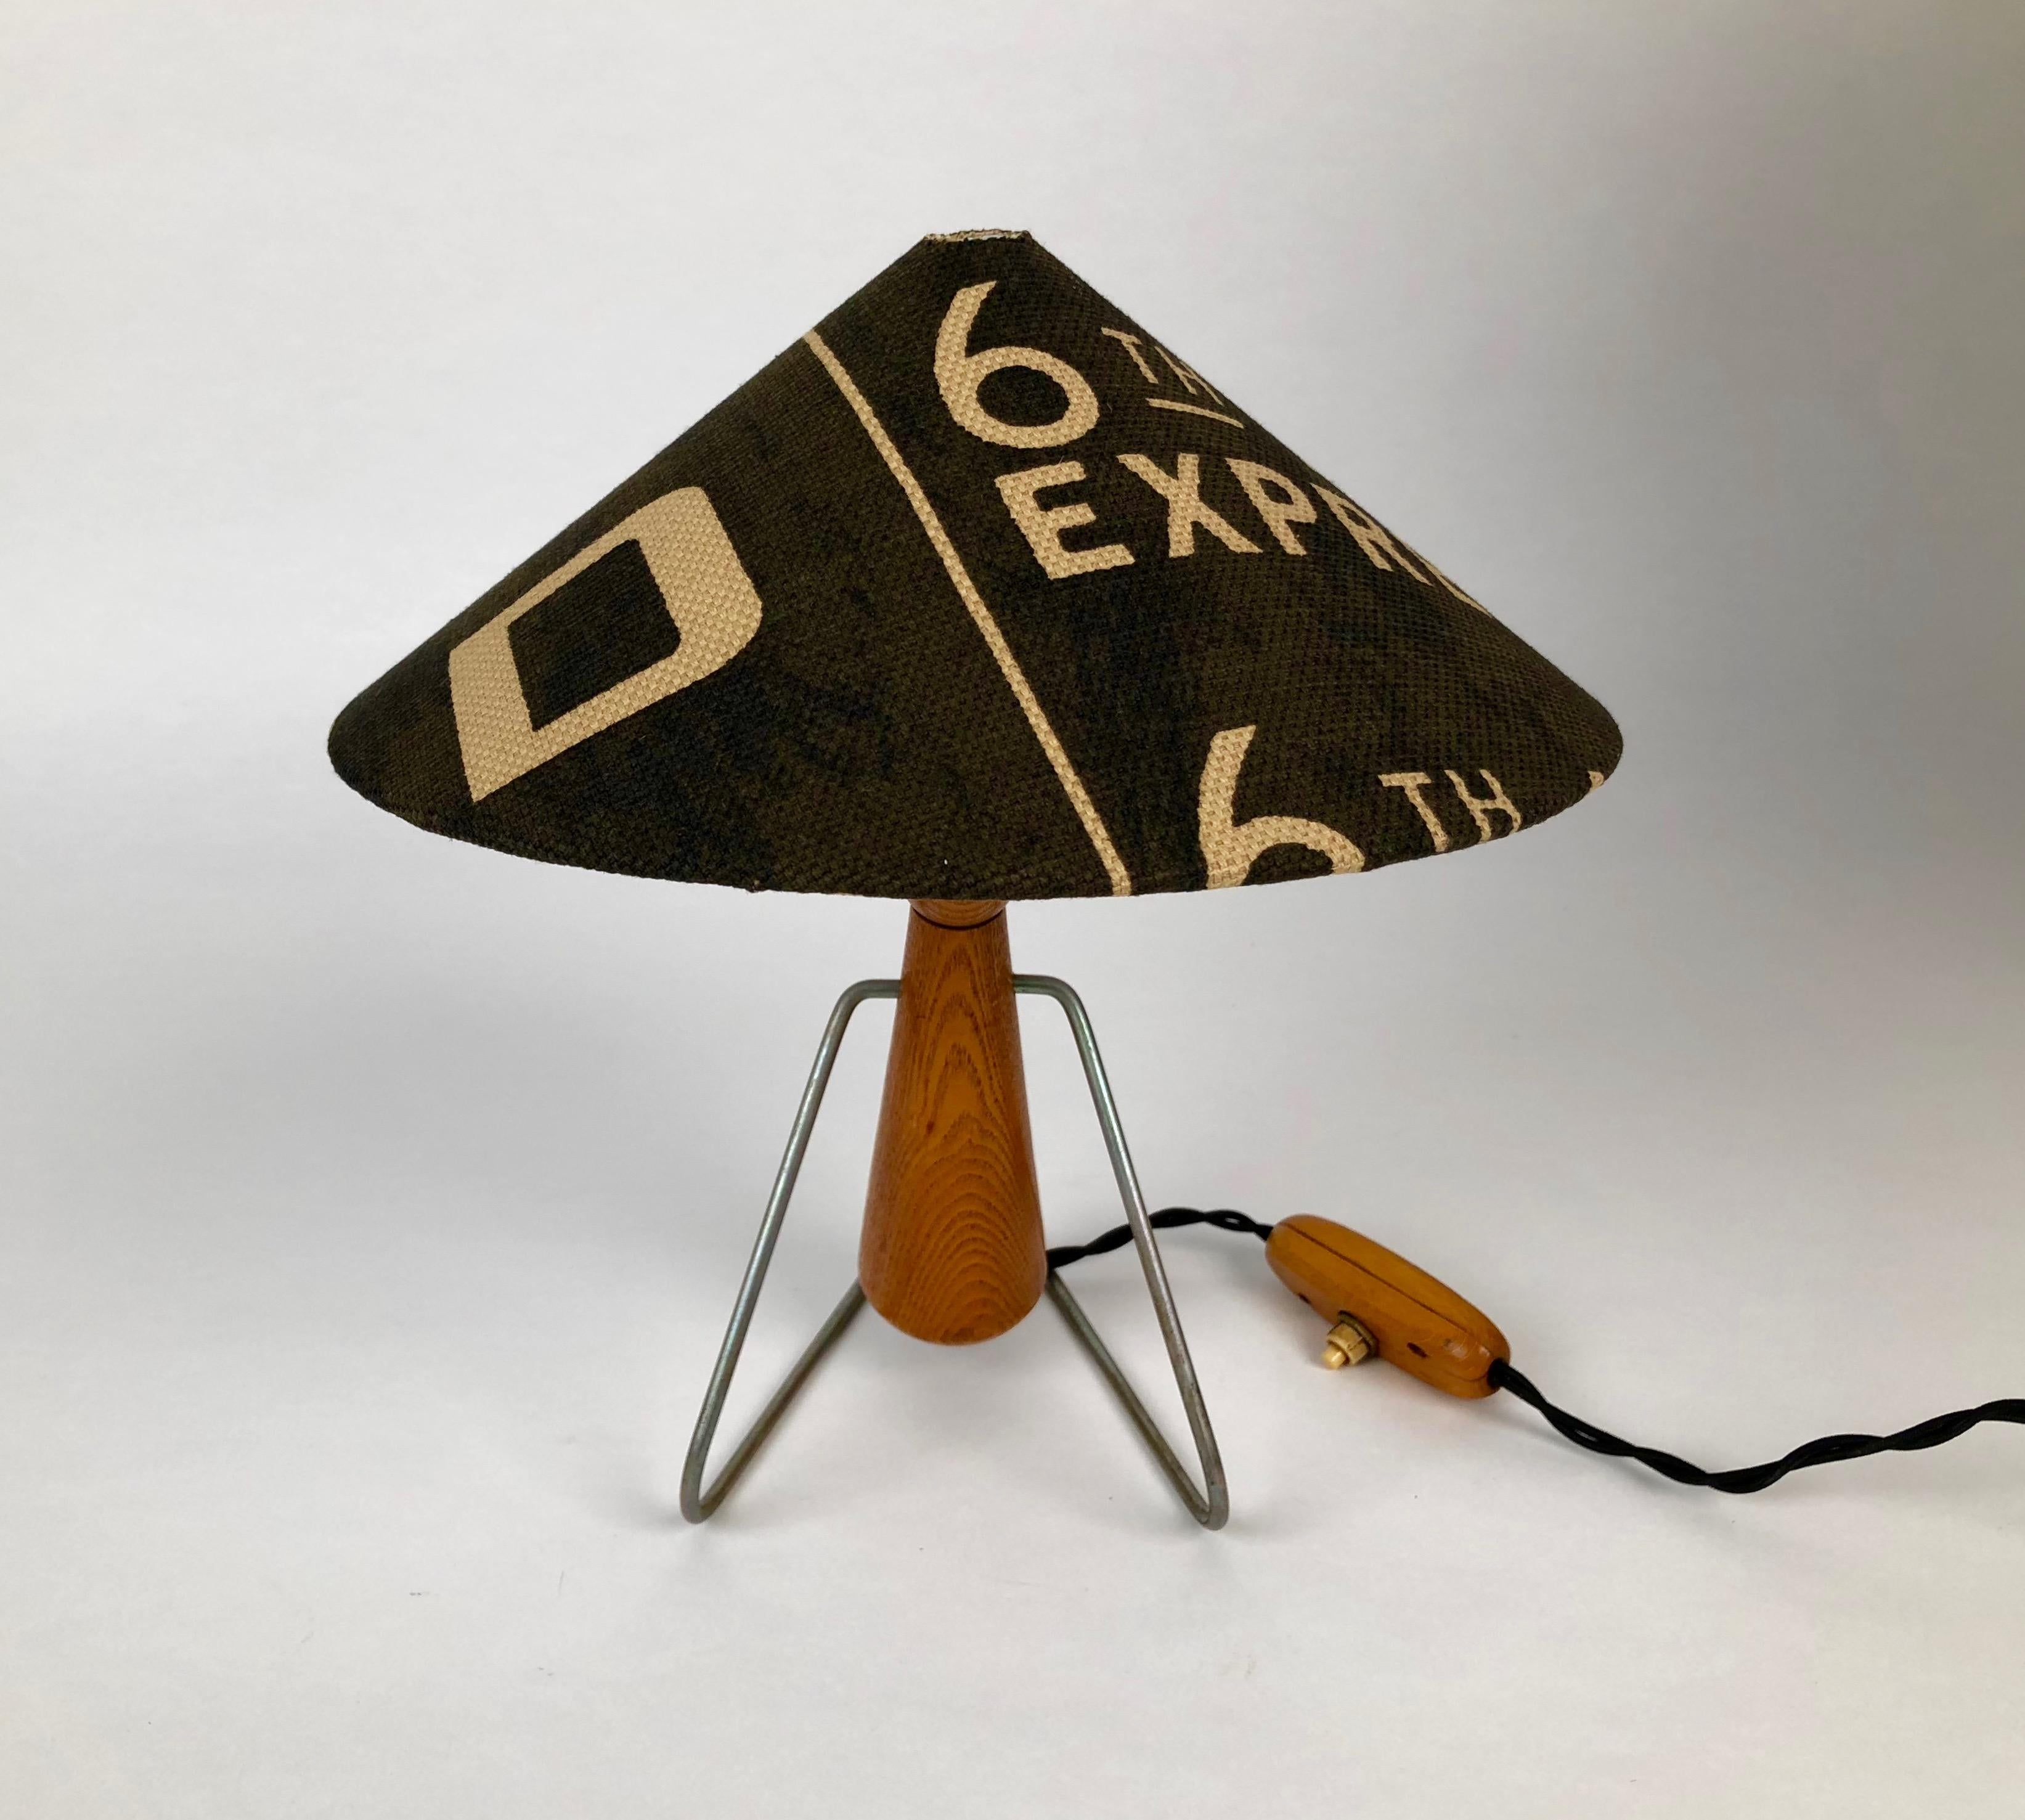 Playful midcentury table lamp, completely in wood including the switch.
The lamp has been rewired with cloth covered cable. The shade is new, in a Martin Andrew fabric.
Early 1950s, from Czechoslovakia.